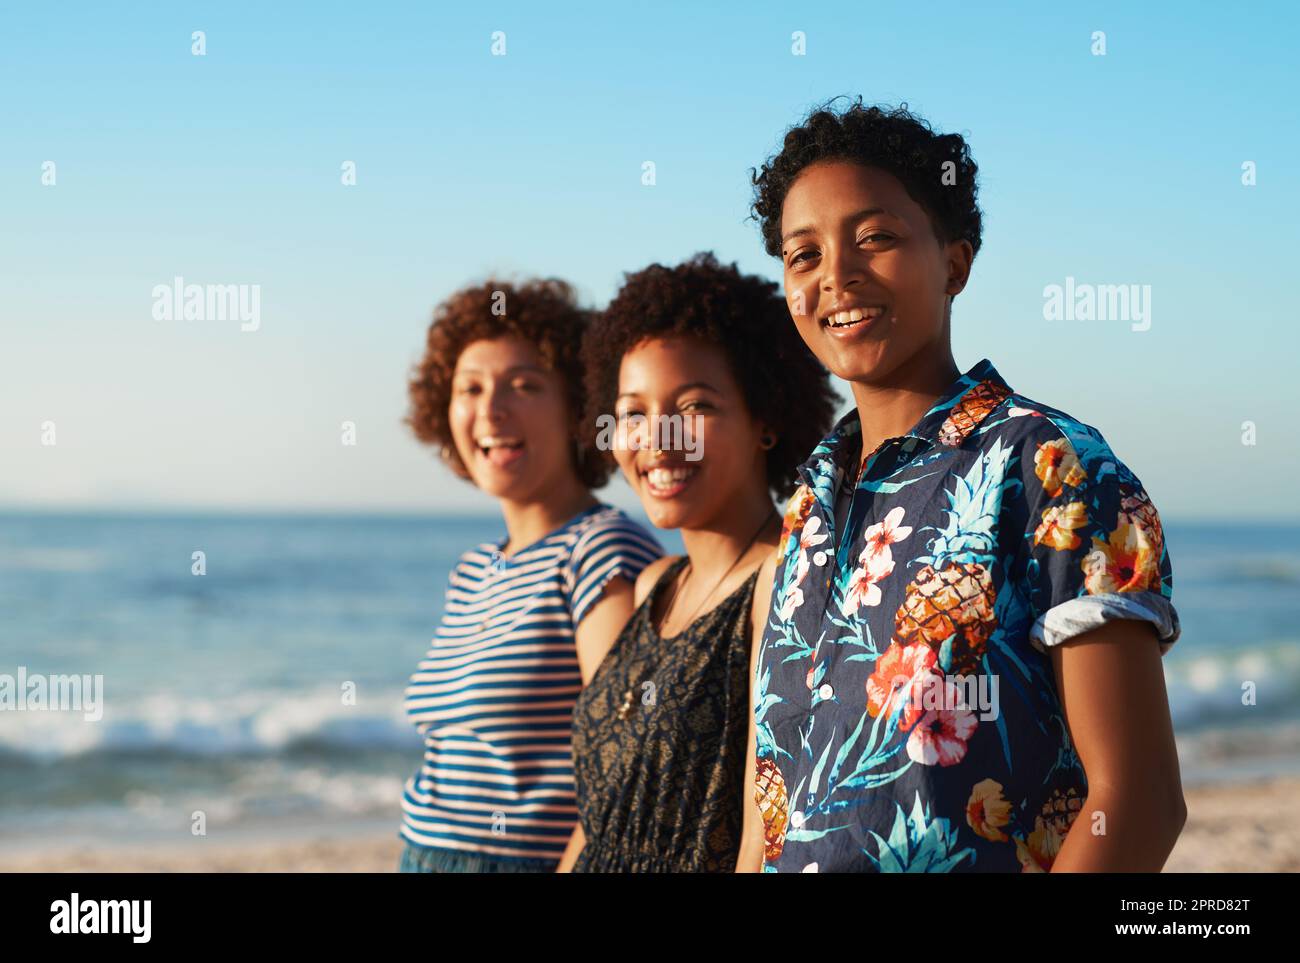 We will always have each others backs. Portrait of three attractive young women standing together and posing on the beach during the day. Stock Photo